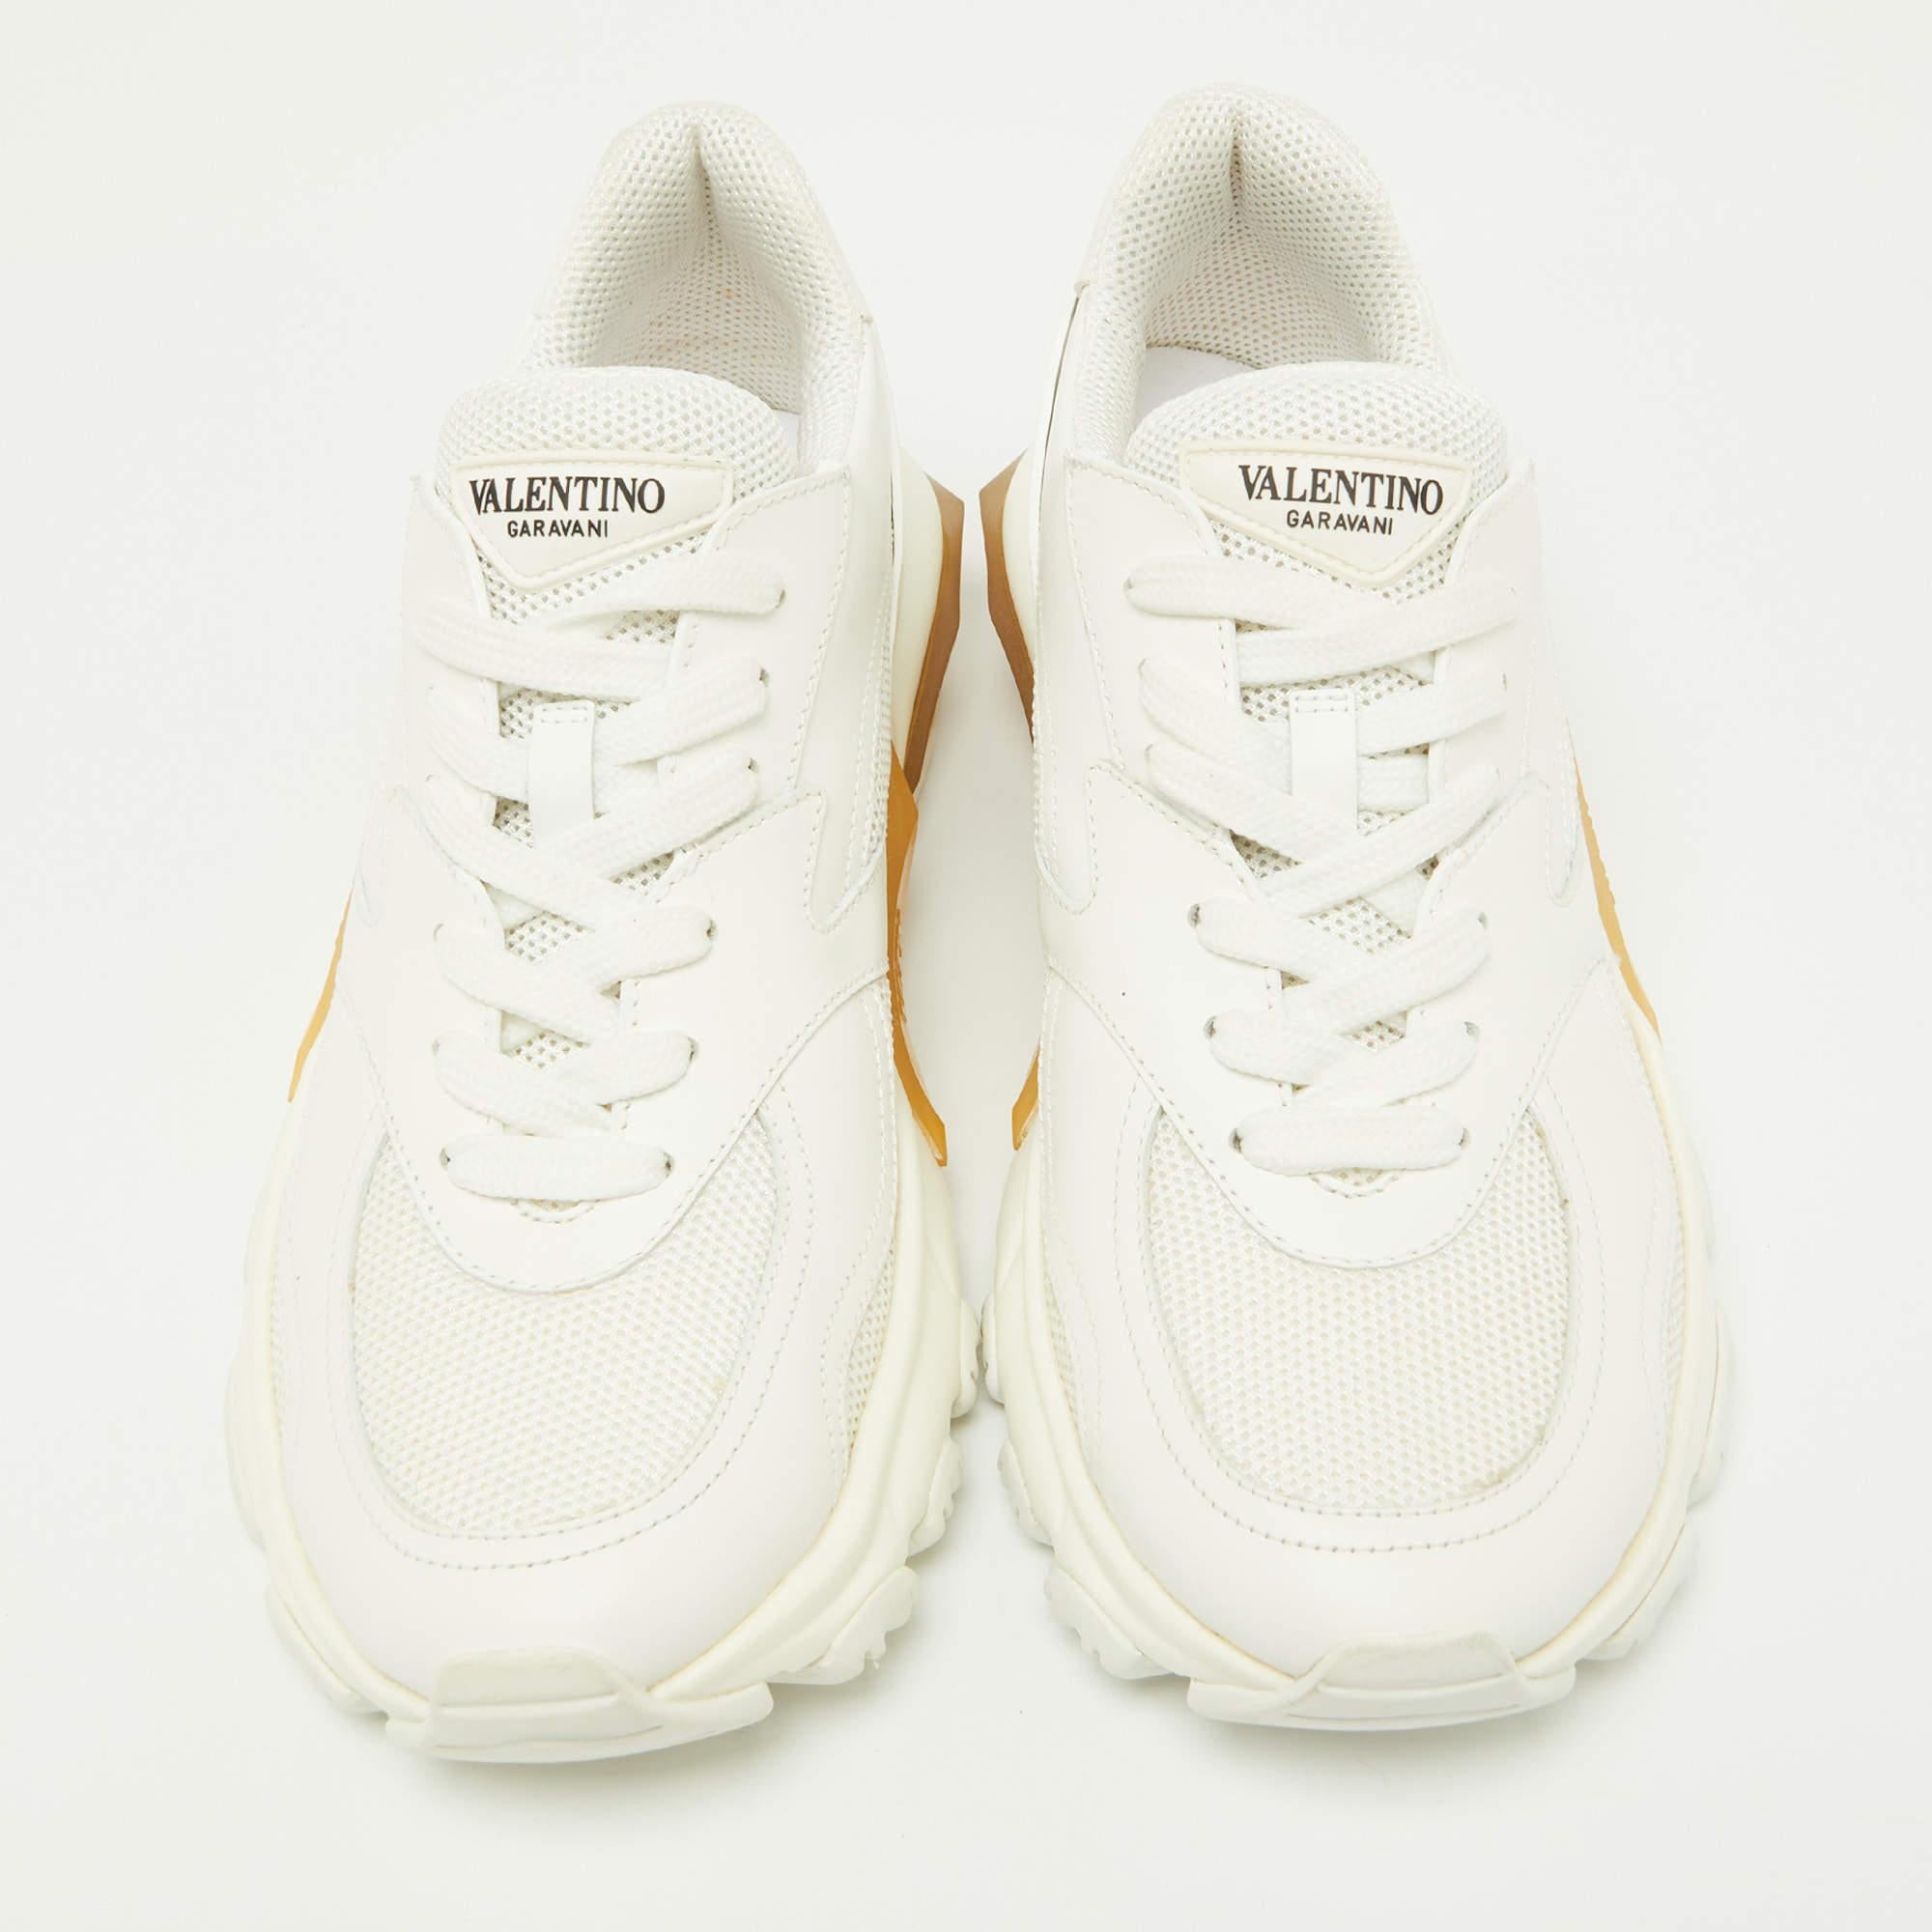 Valentino's Bounce sneaker is presented in white leather, with brand details, elevated soles, and laces for easy securing. The shoes fit well and look great.

Includes
Original Dustbag, Extra Lace